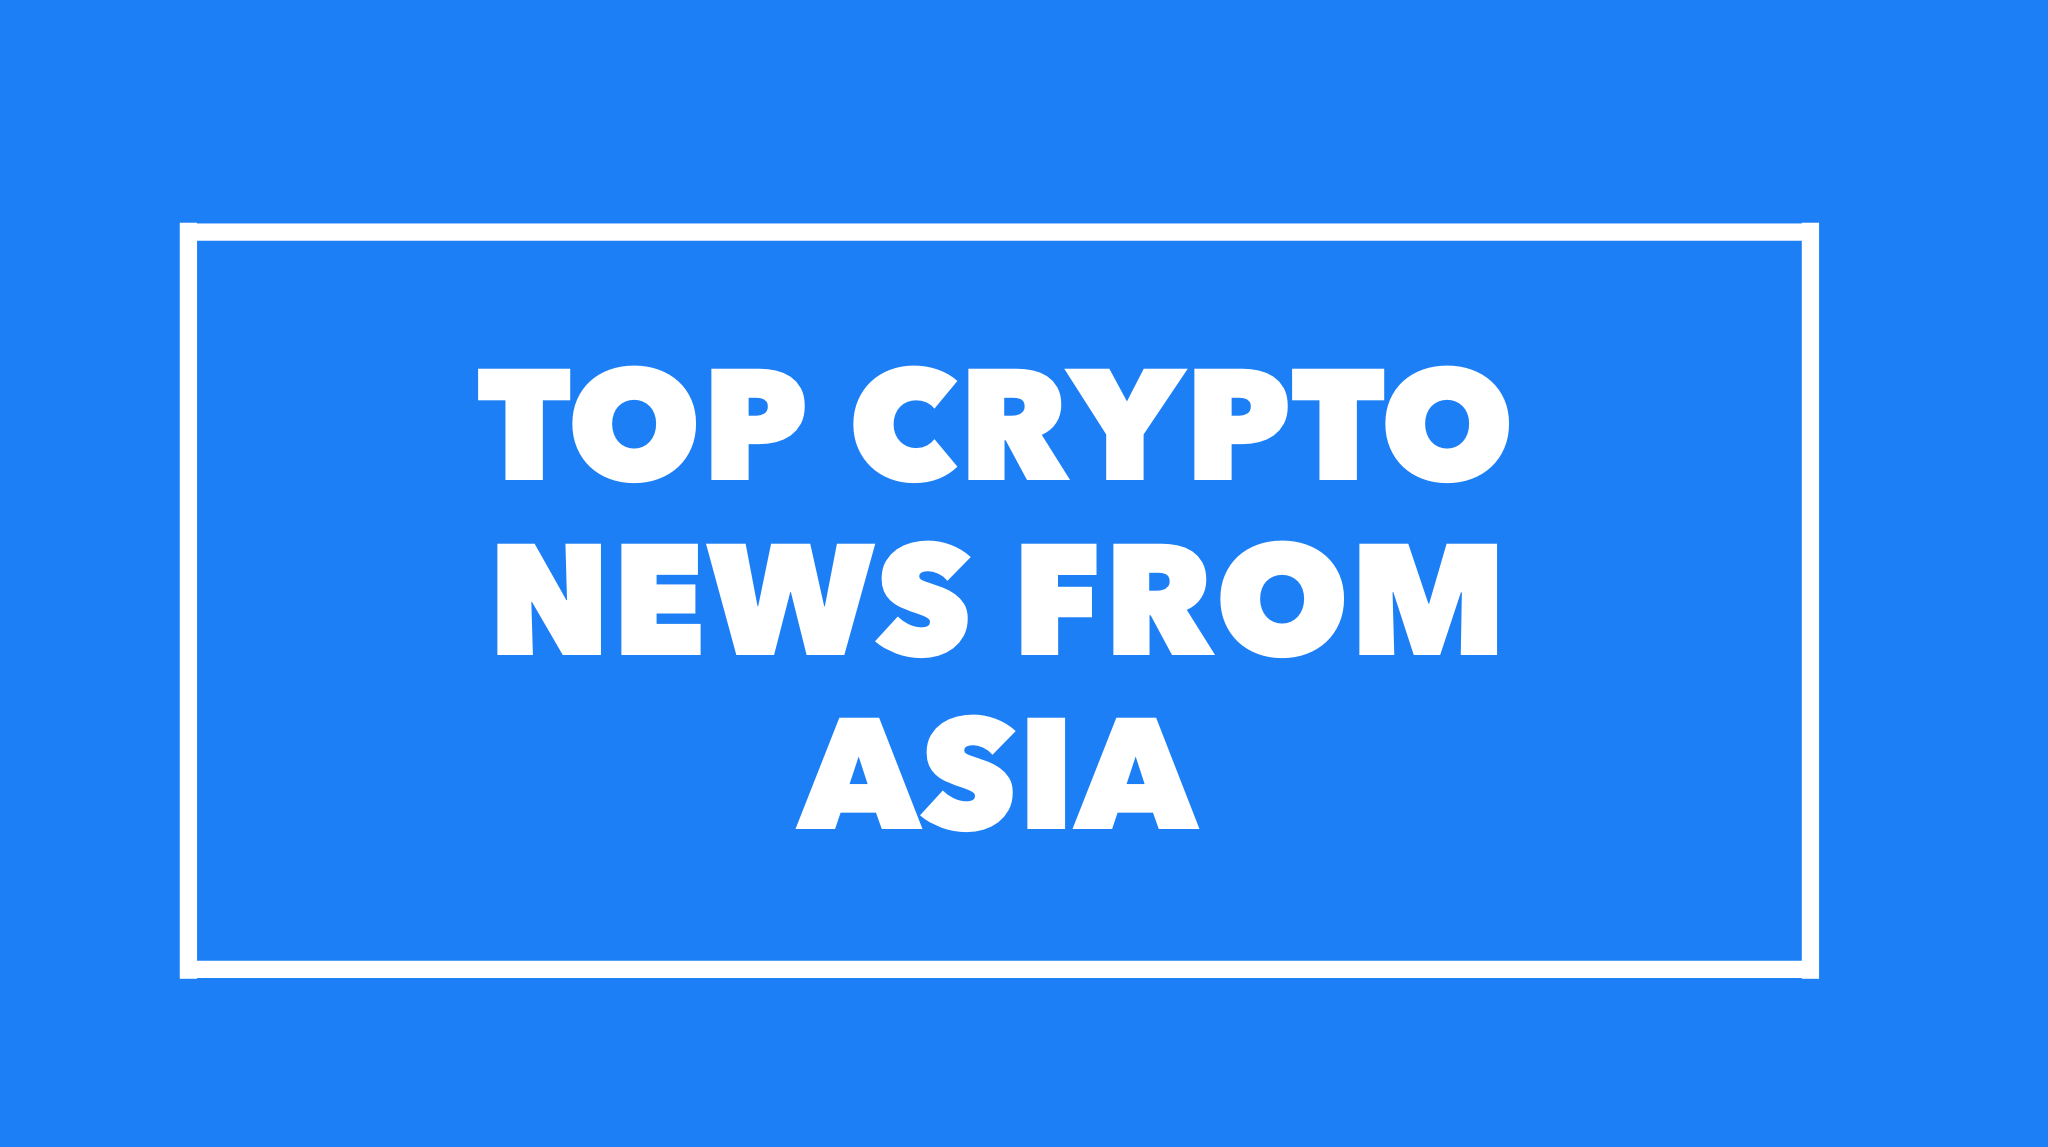 Today’s Top Crypto News in Asia- July 18th